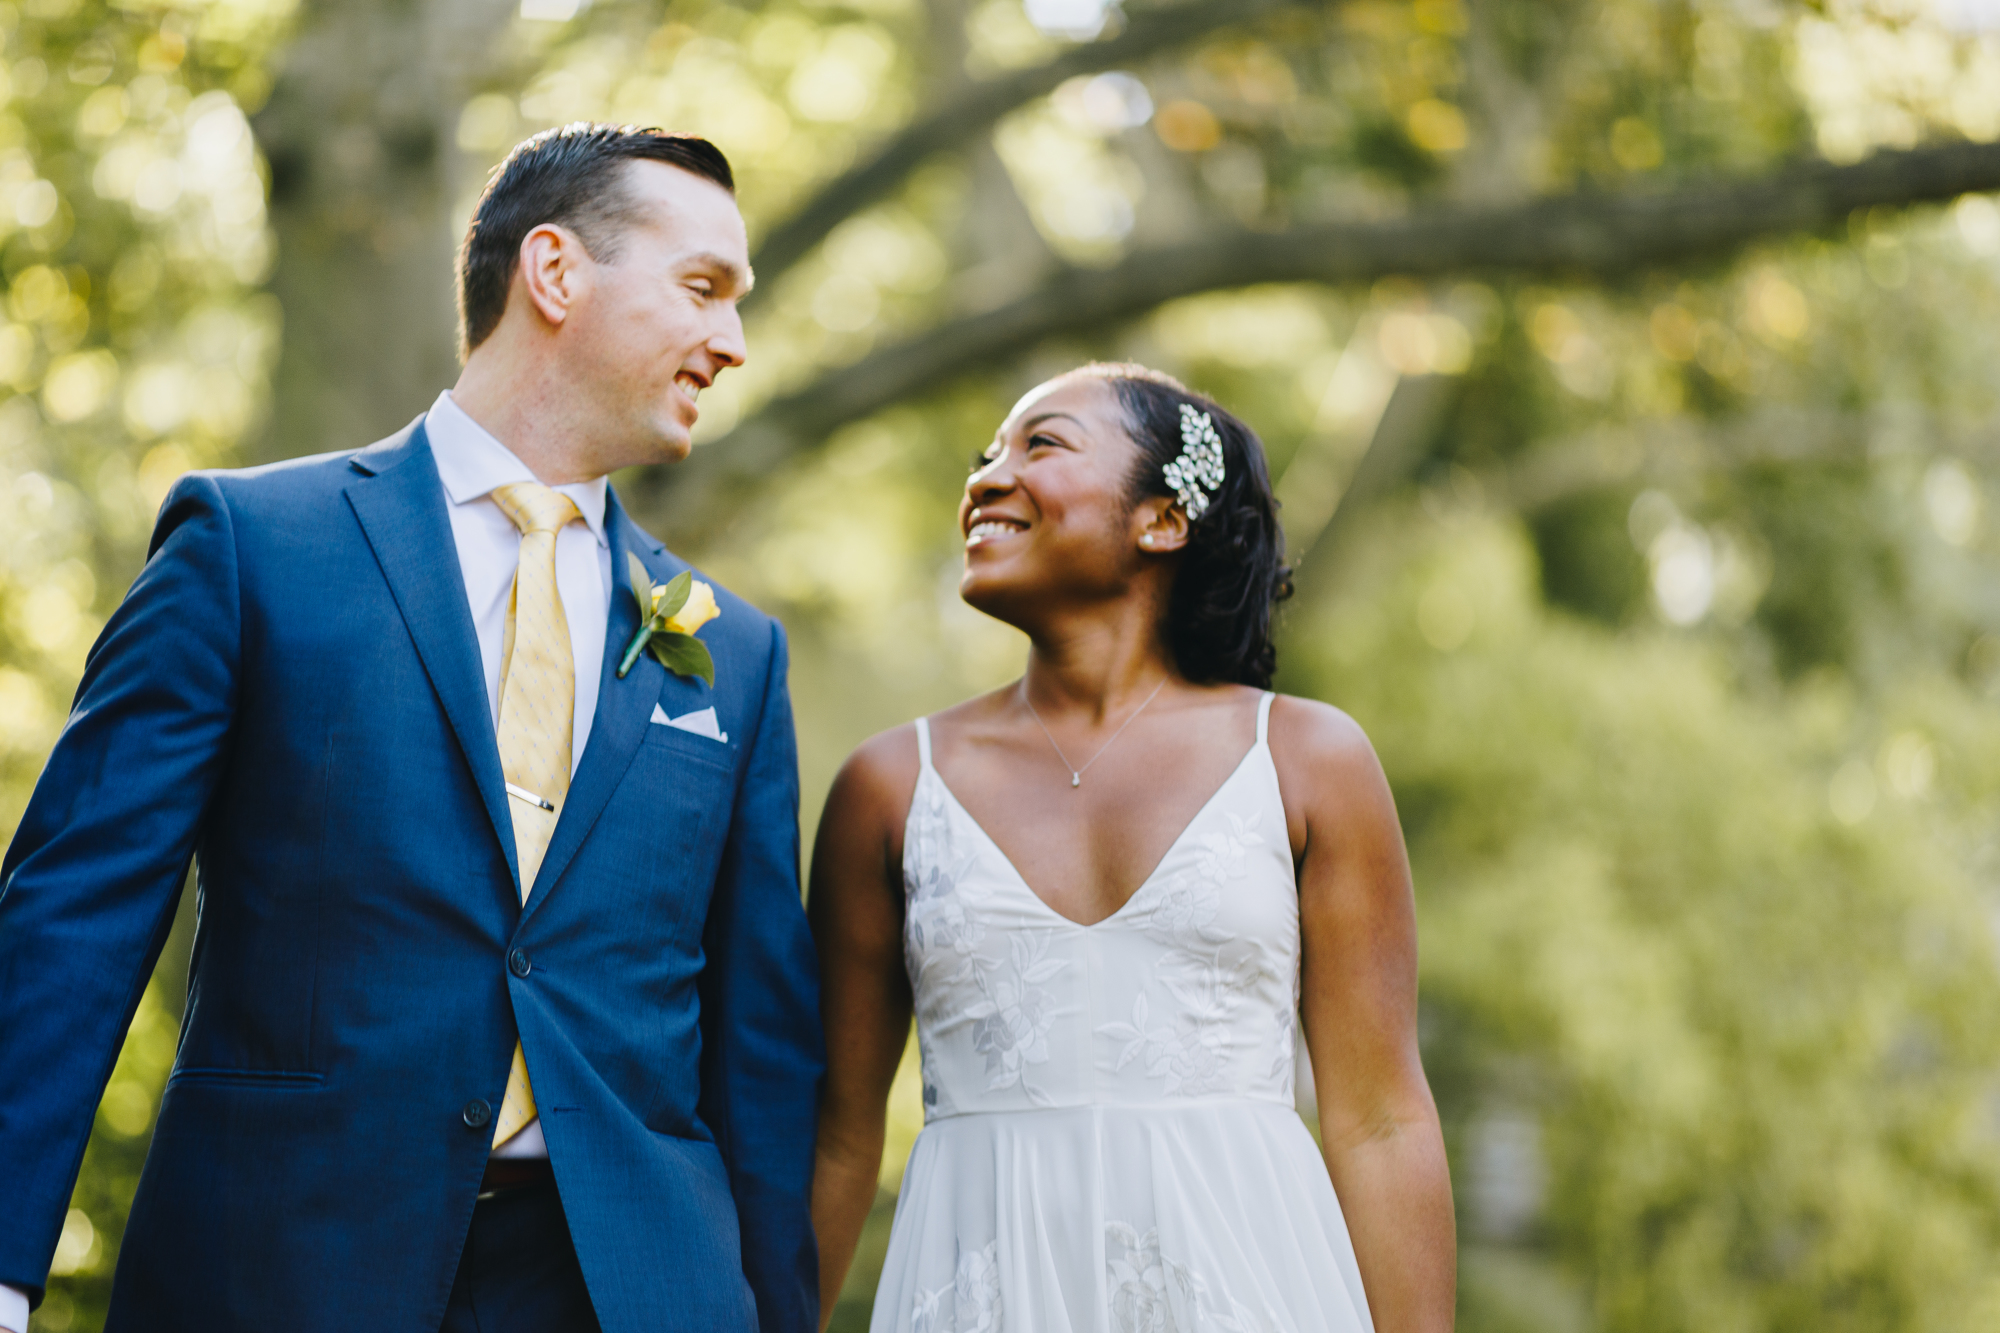 Spring Central Park Elopement Photos in NYC